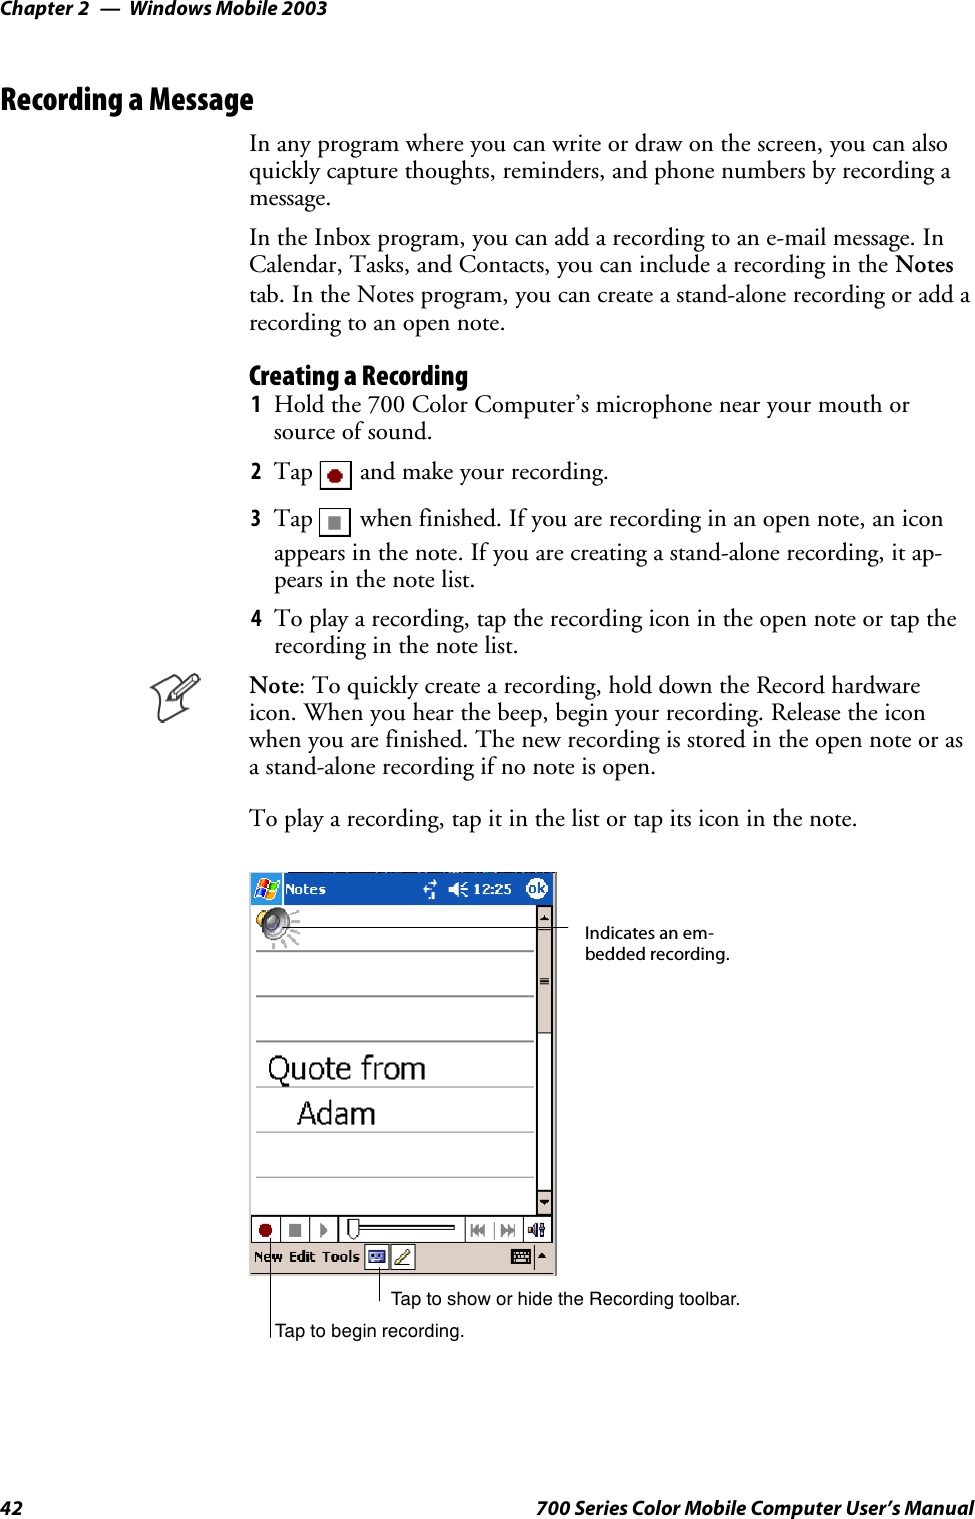 Windows Mobile 2003Chapter —242 700 Series Color Mobile Computer User’s ManualRecording a MessageIn any program where you can write or draw on the screen, you can alsoquickly capture thoughts, reminders, and phone numbers by recording amessage.In the Inbox program, you can add a recording to an e-mail message. InCalendar, Tasks, and Contacts, you can include a recording in the Notestab. In the Notes program, you can create a stand-alone recording or add arecording to an open note.Creating a Recording1Hold the 700 Color Computer’s microphone near your mouth orsource of sound.2Tap and make your recording.3Tap when finished. If you are recording in an open note, an iconappears in the note. If you are creating a stand-alone recording, it ap-pears in the note list.4To play a recording, tap the recording icon in the open note or tap therecording in the note list.Note: To quickly create a recording, hold down the Record hardwareicon. When you hear the beep, begin your recording. Release the iconwhen you are finished. The new recording is stored in the open note or asa stand-alone recording if no note is open.To play a recording, tap it in the list or tap its icon in the note.Indicates an em-bedded recording.Tap to begin recording.Tap to show or hide the Recording toolbar.